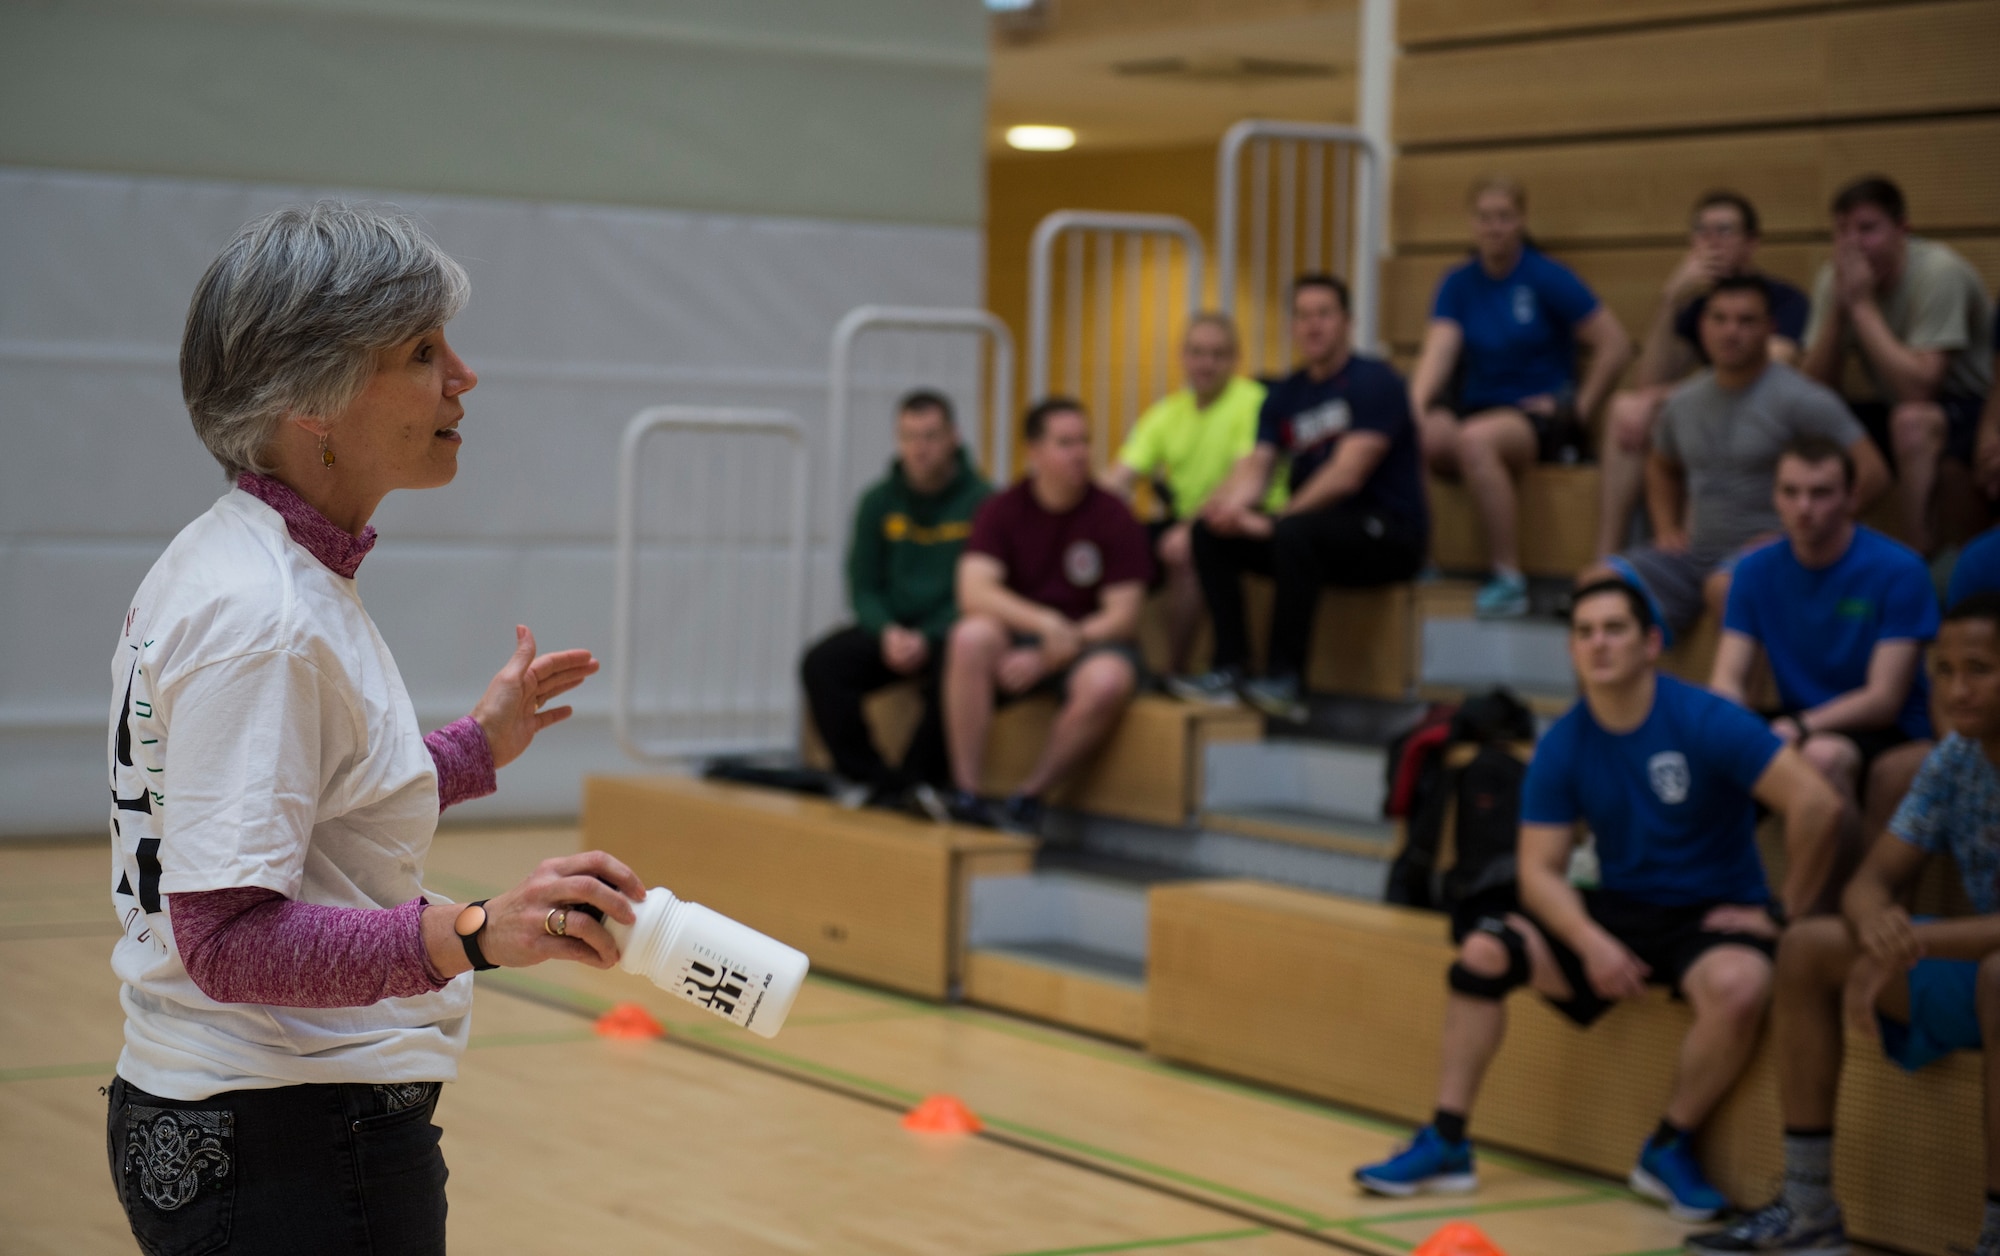 Helena Palmer, 52nd Fighter Wing community support coordinator, thanks Airmen for participating in the RUFit Dodgeball Tournament in the fitness center Dec. 11, 2015, at Spangdahlem Air Base, Germany. Coed teams of 5-7 players could participate in the combat fitness-style dodgeball tournament. (U.S. Air Force photo by Staff Sgt. Christopher Ruano/Released)